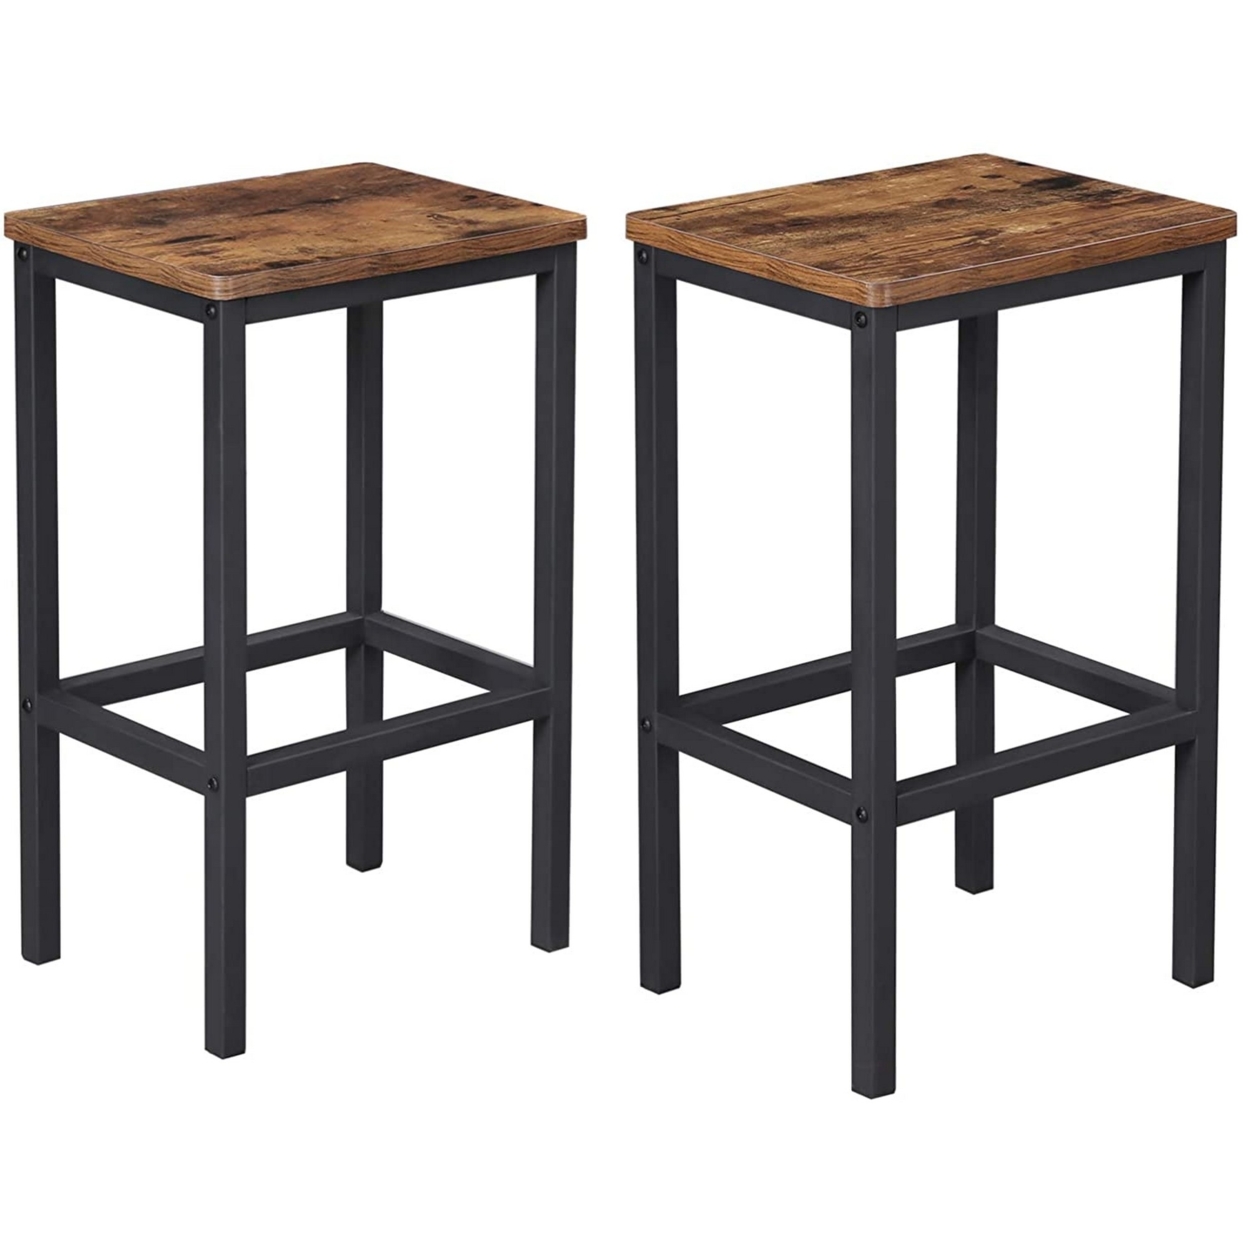 25.6 Inches Bar Stool With Wooden Seat, Set Of 2, Brown And Black- Saltoro Sherpi